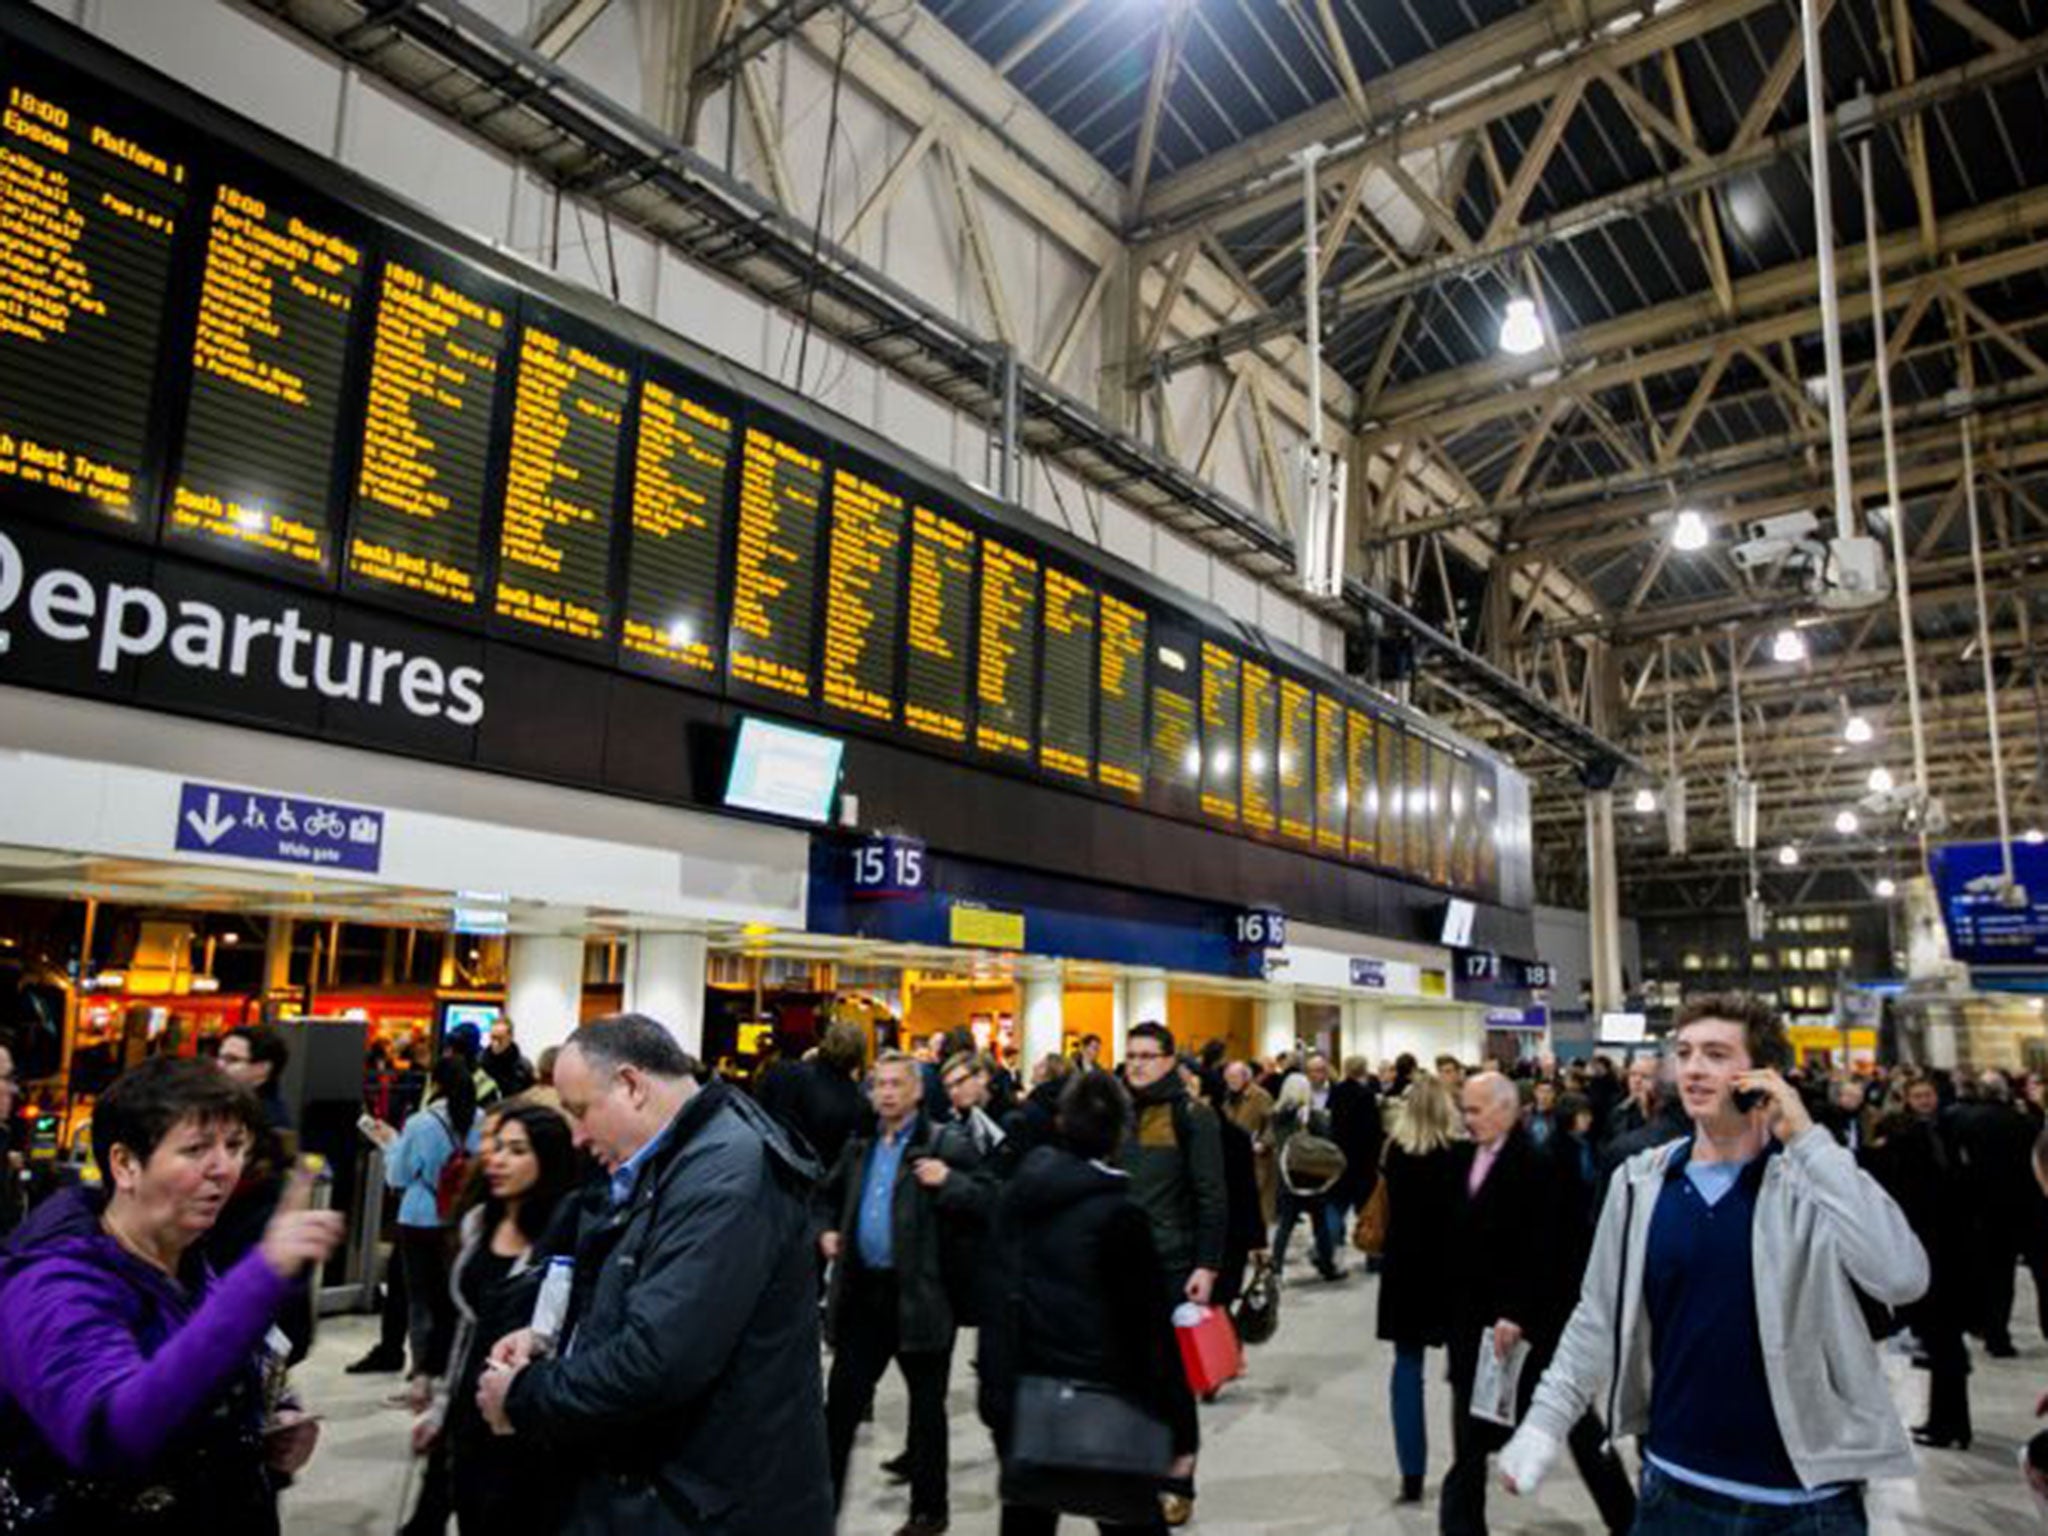 The new franchise will see 22,000 extra seats into London Waterloo each morning peak, and 30,000 extra seats out of Waterloo each evening peak